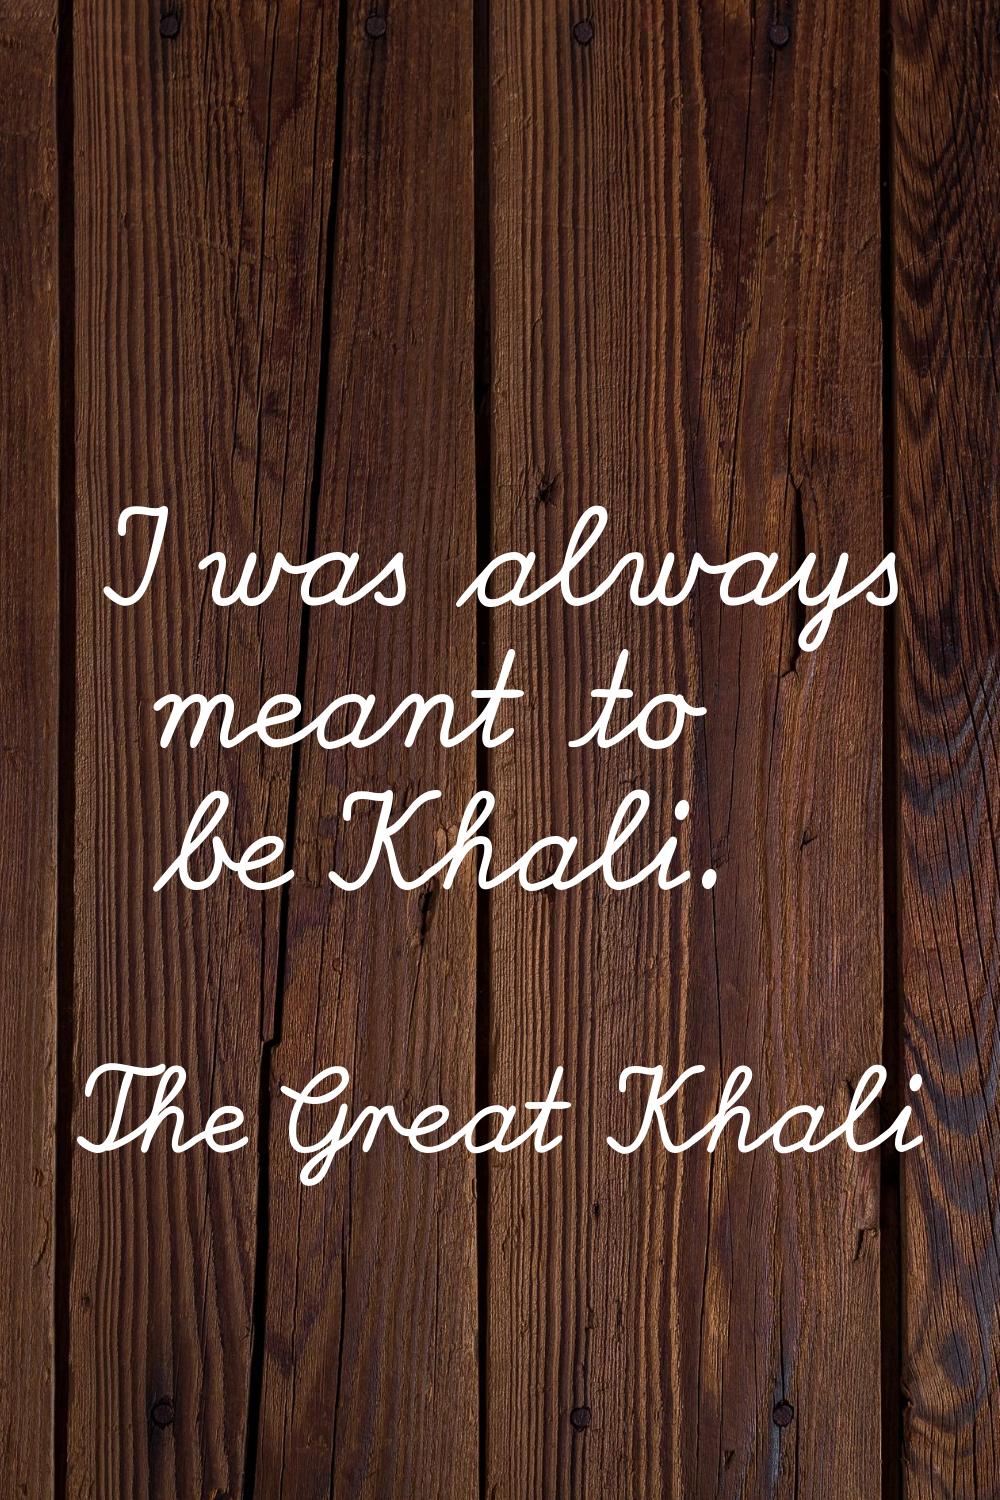 I was always meant to be Khali.